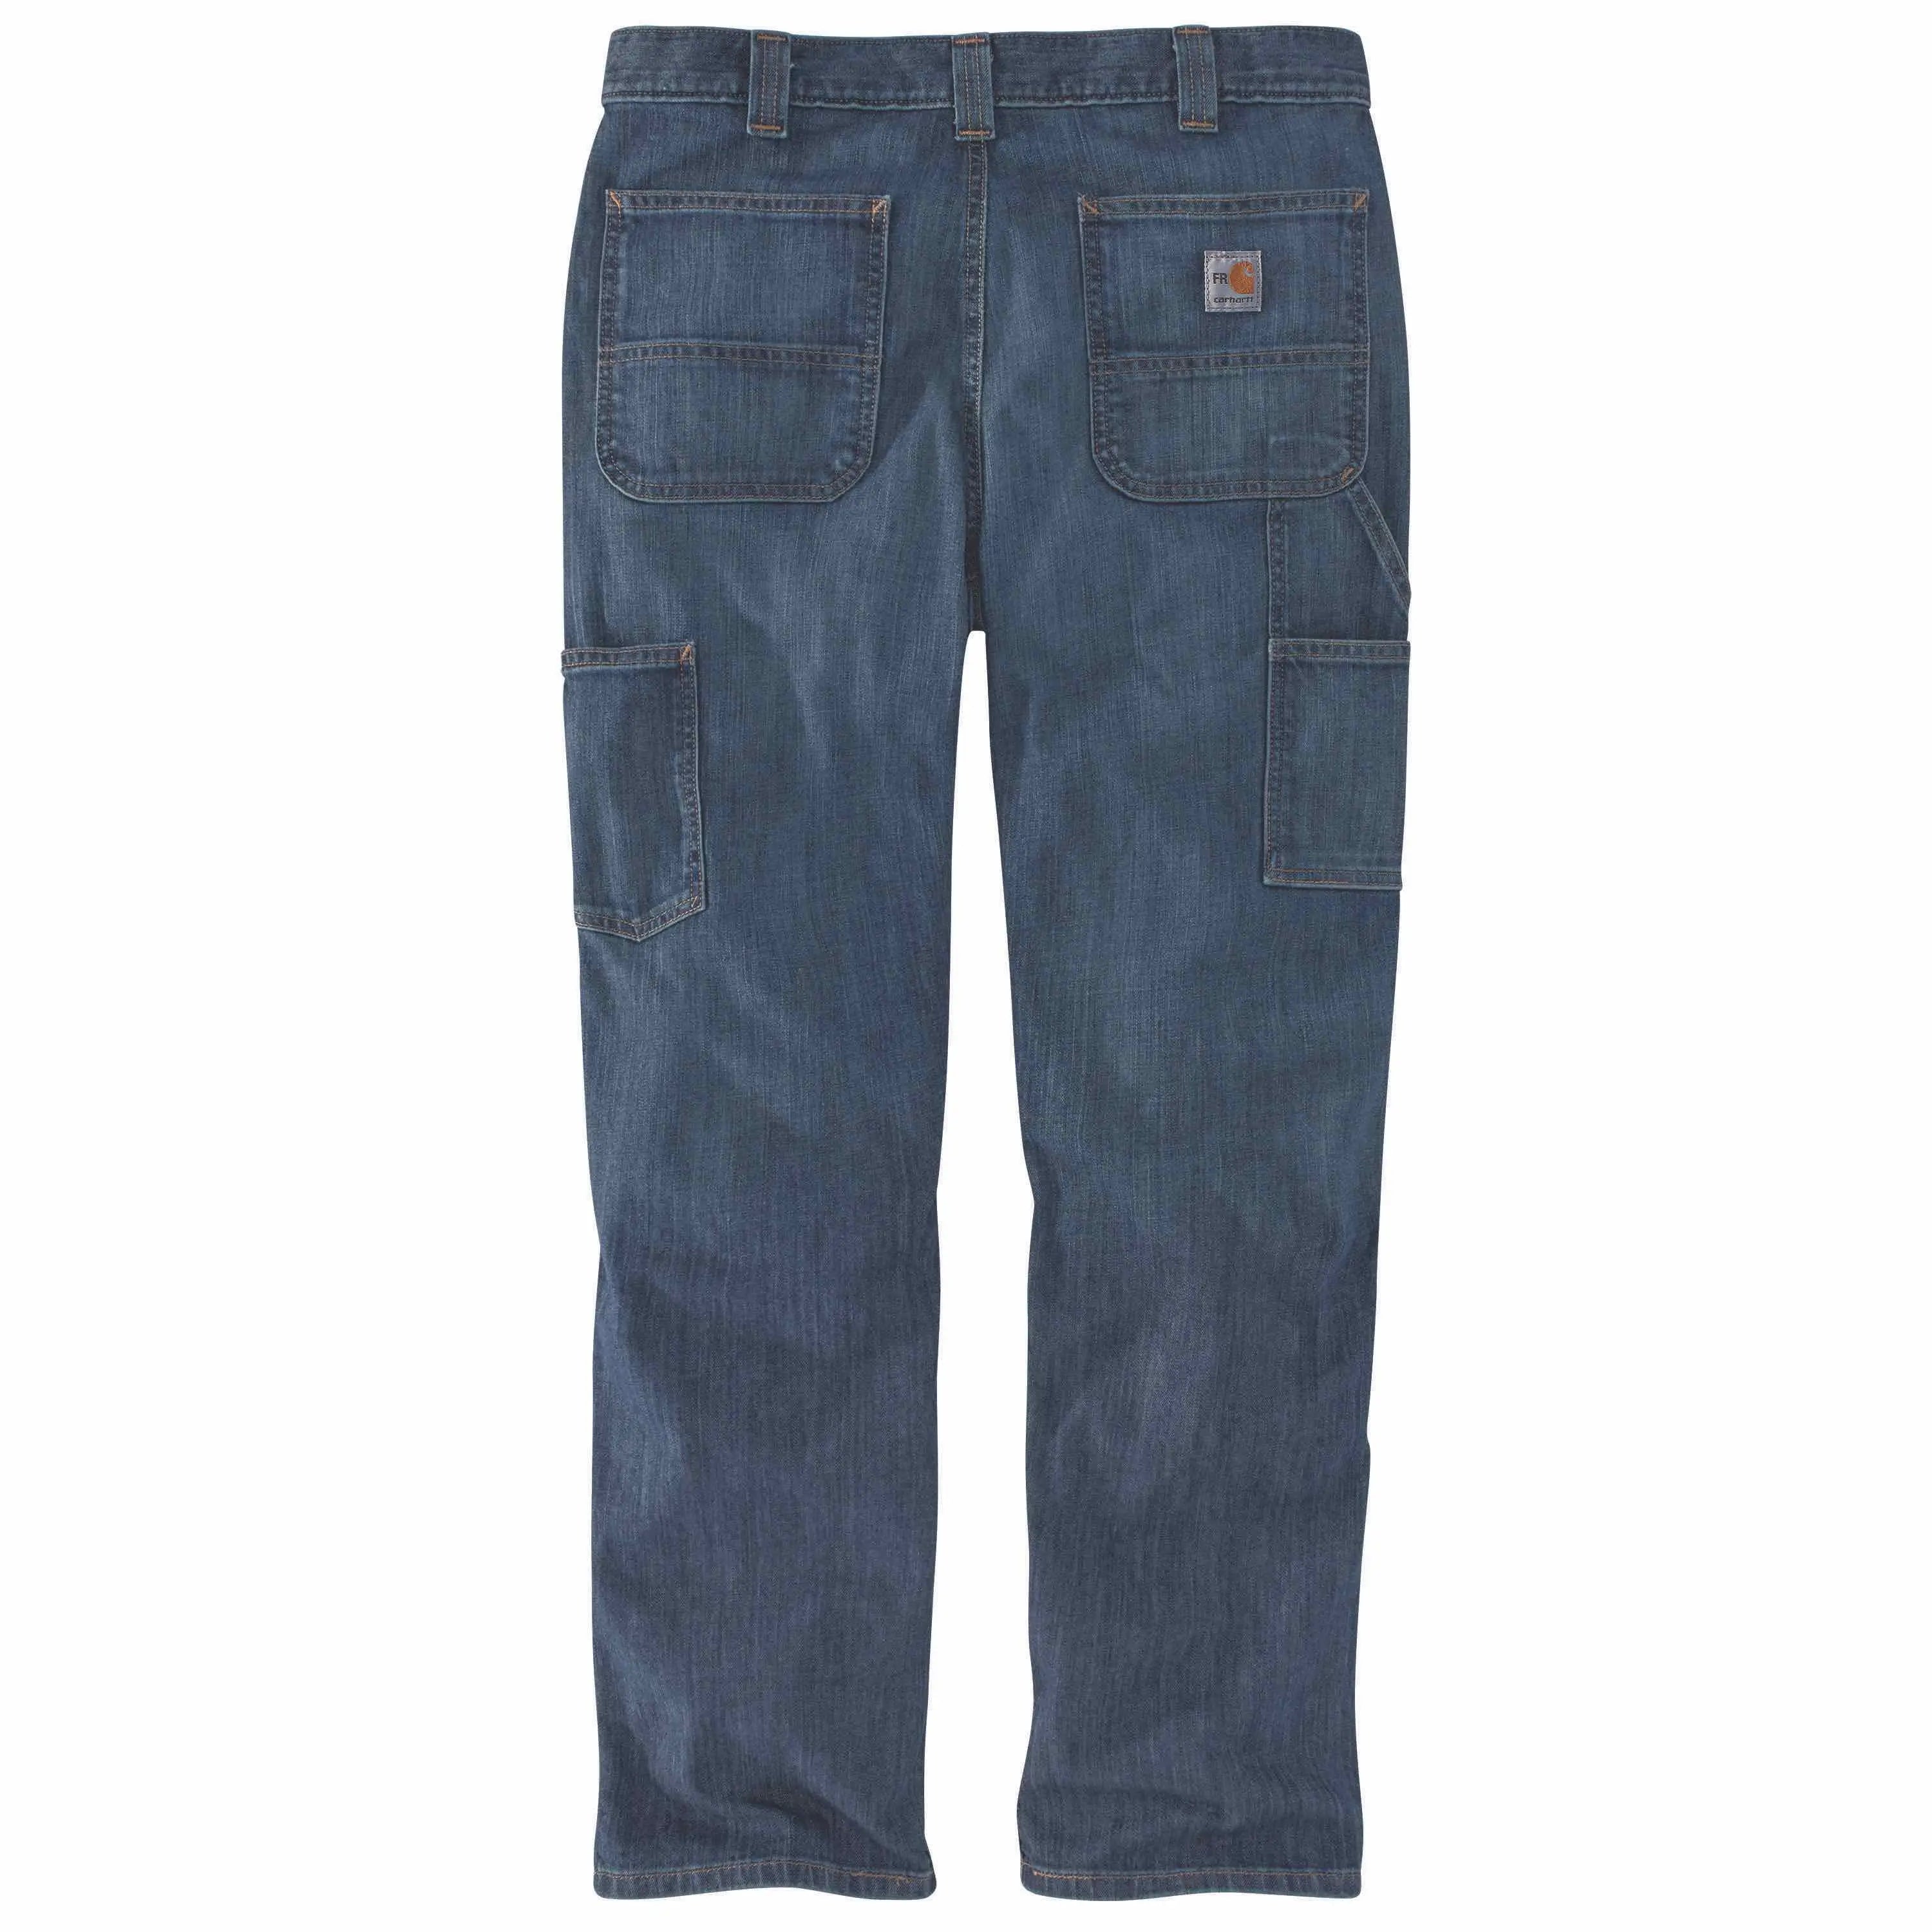 Cofra Biarritz work jeans trousers